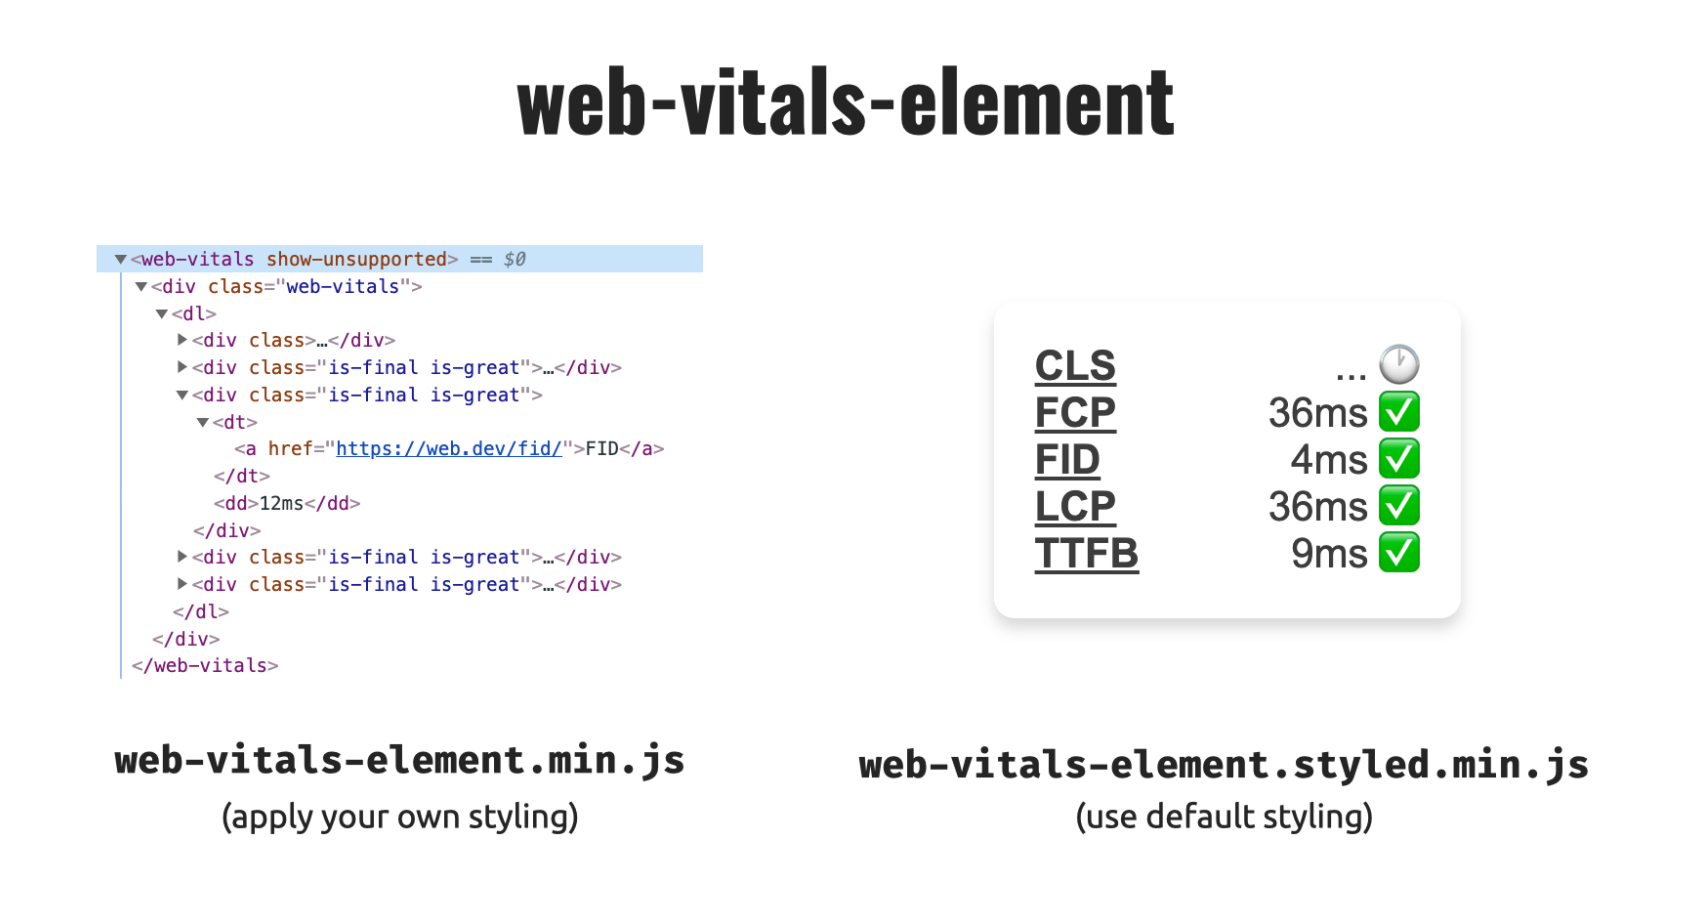 Web-vitals-element example showing an unstyled and a styled version depending on what file is loaded